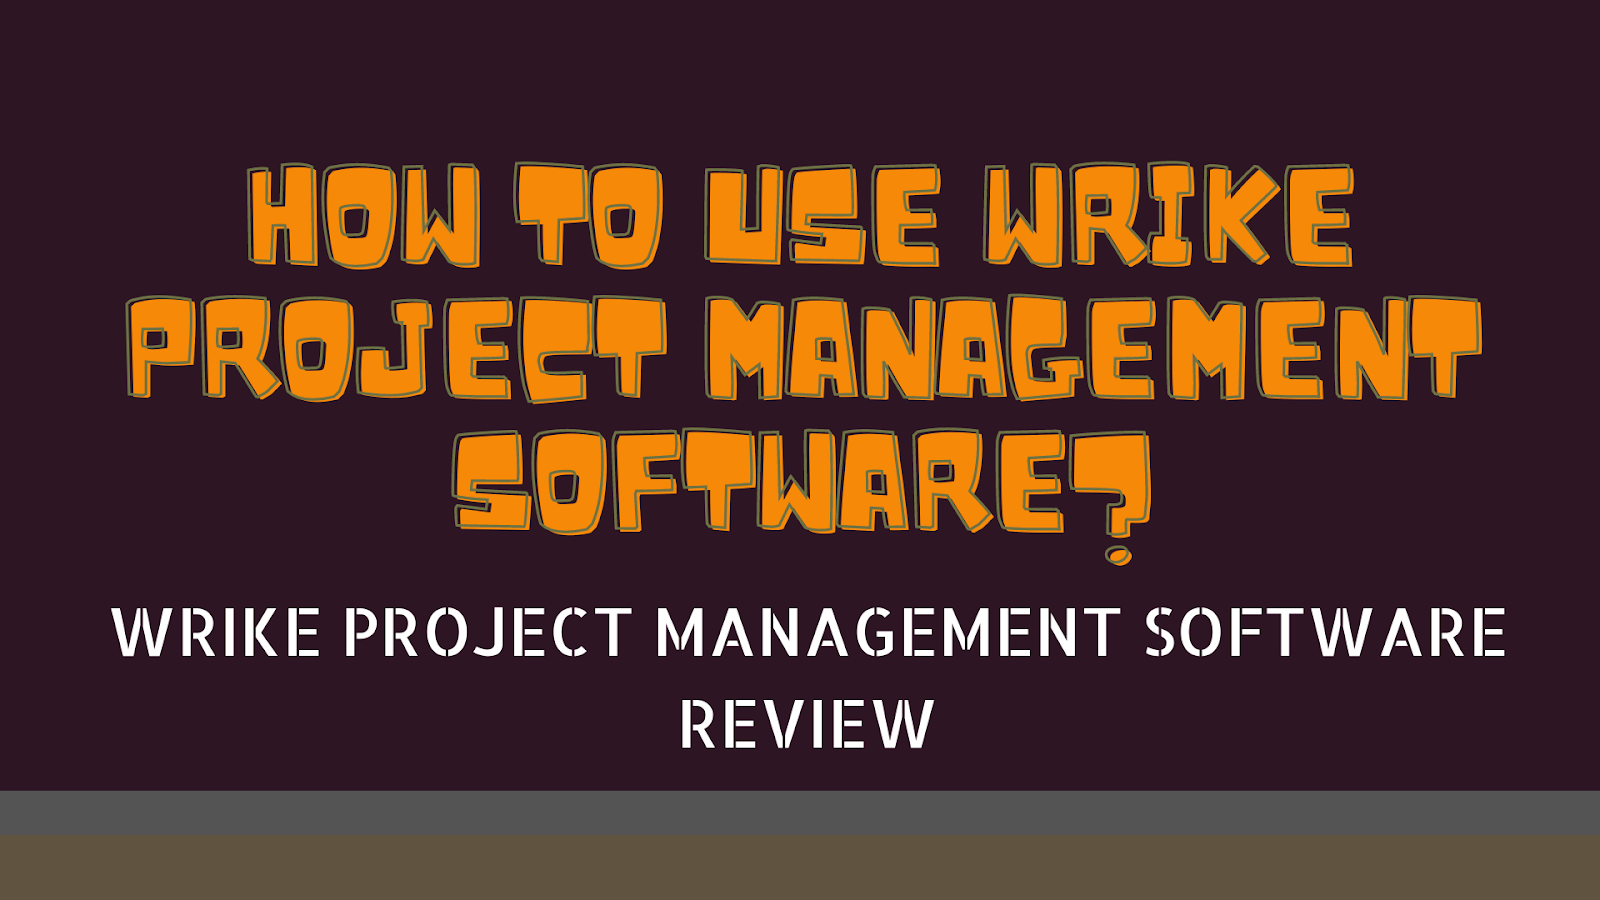 How To Use Wrike Project Management Software?